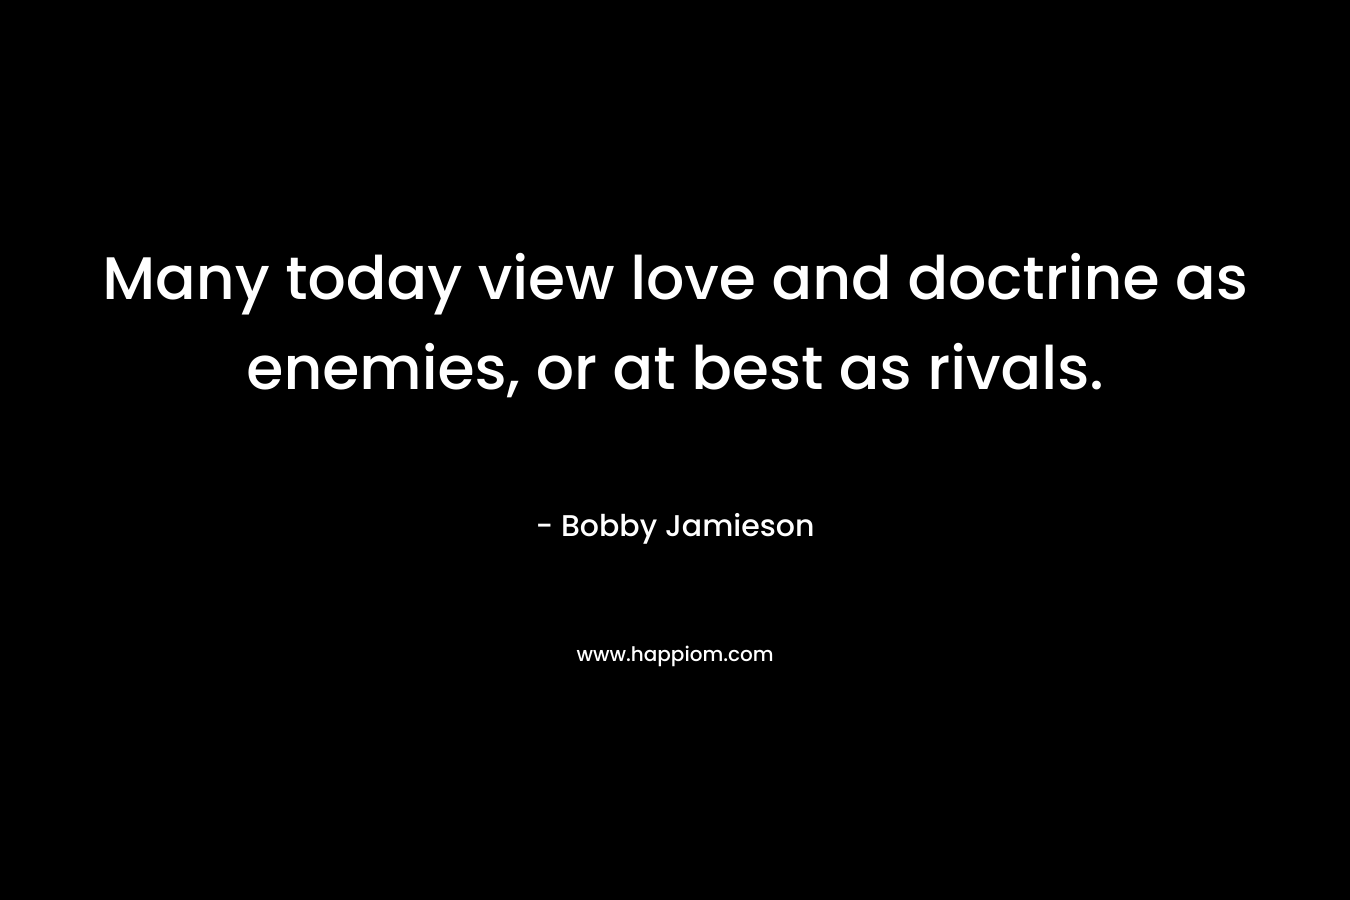 Many today view love and doctrine as enemies, or at best as rivals. – Bobby Jamieson